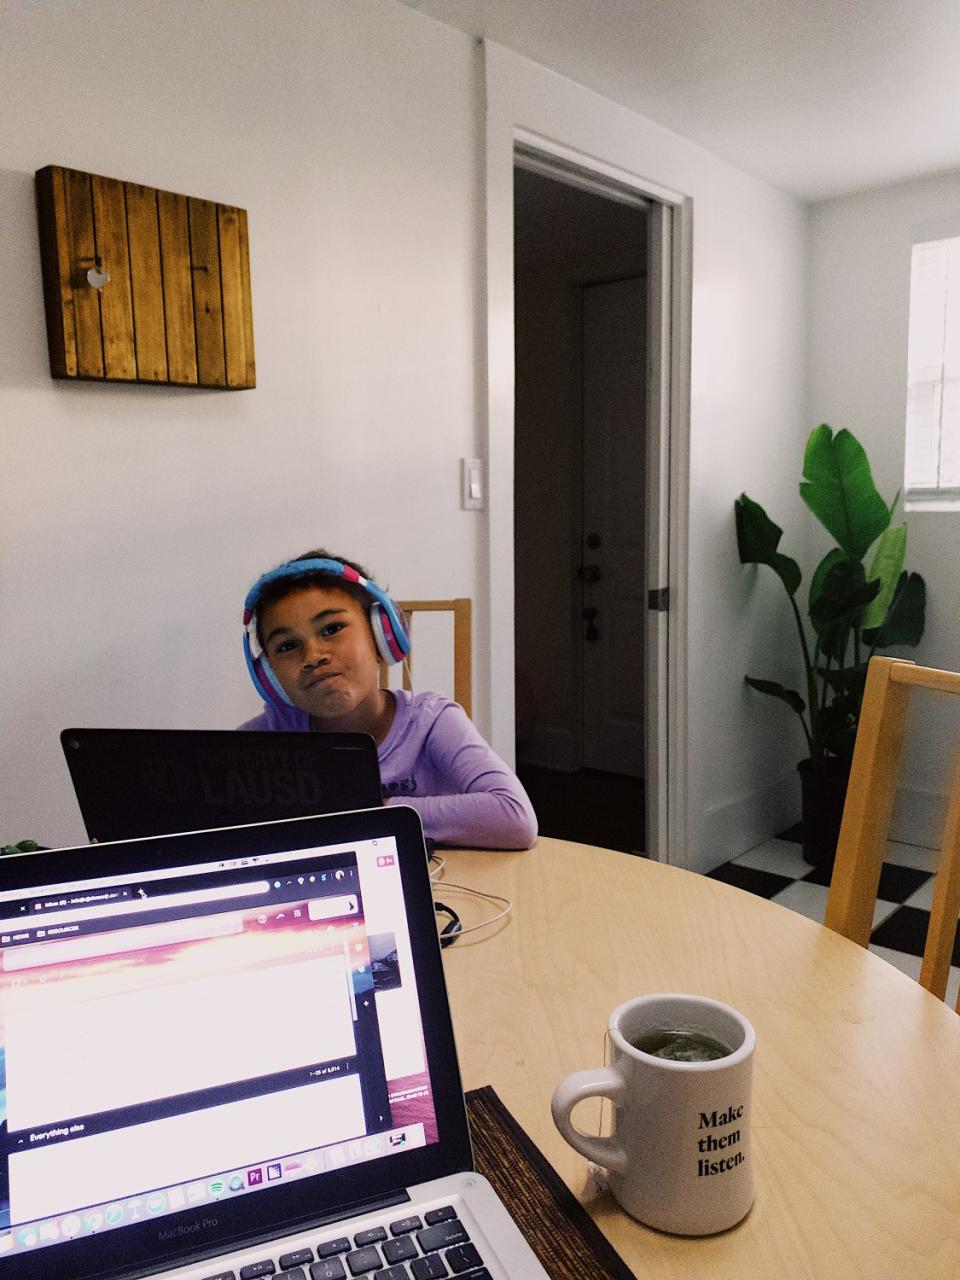 Fiona does schoolwork from home with father amid coronavirus concerns